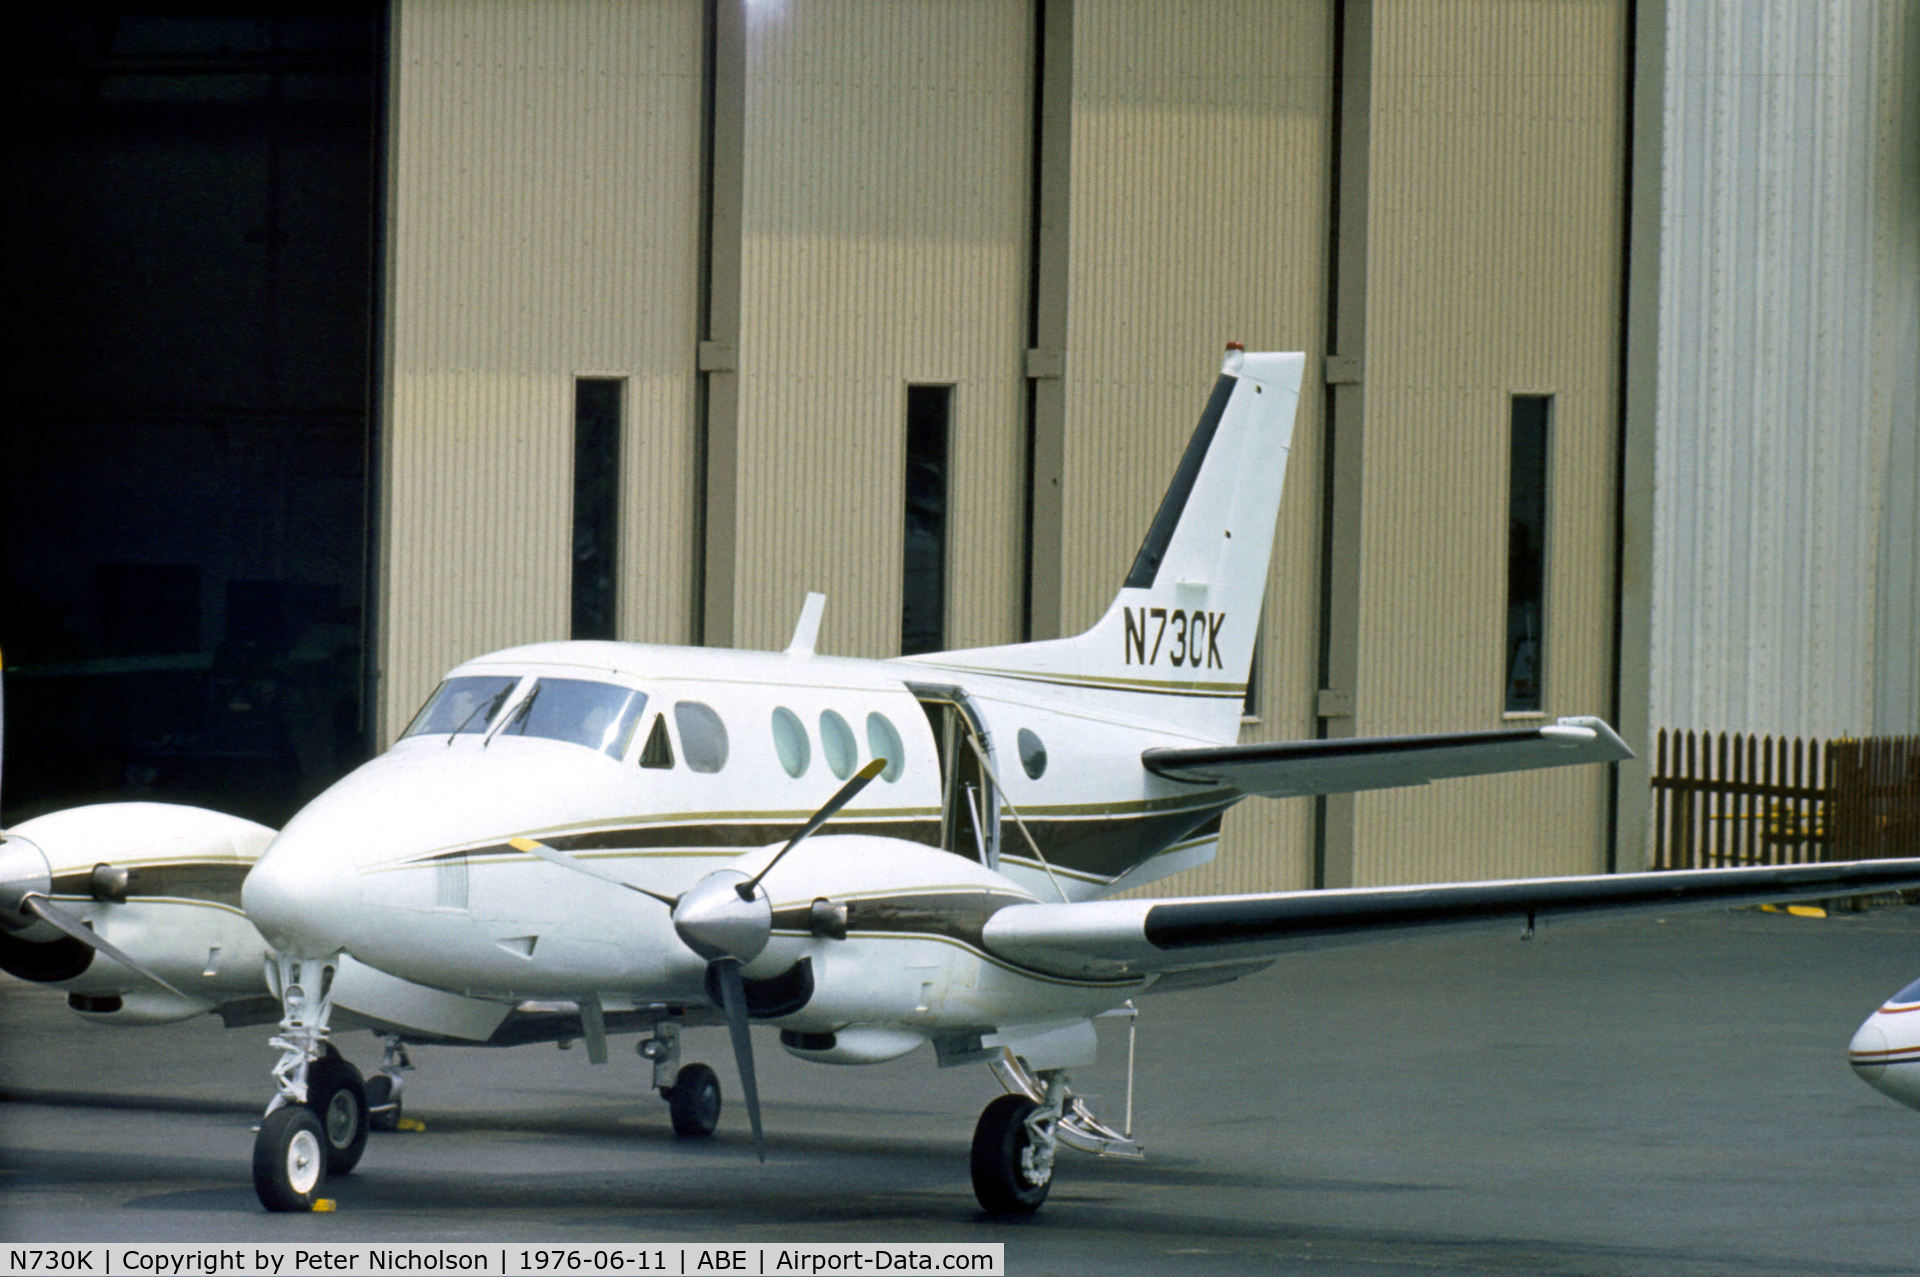 N730K, 1972 Beech E-90 King Air C/N LW-5, Beech King Air E90 seen at Allentown in the Summer of 1976.